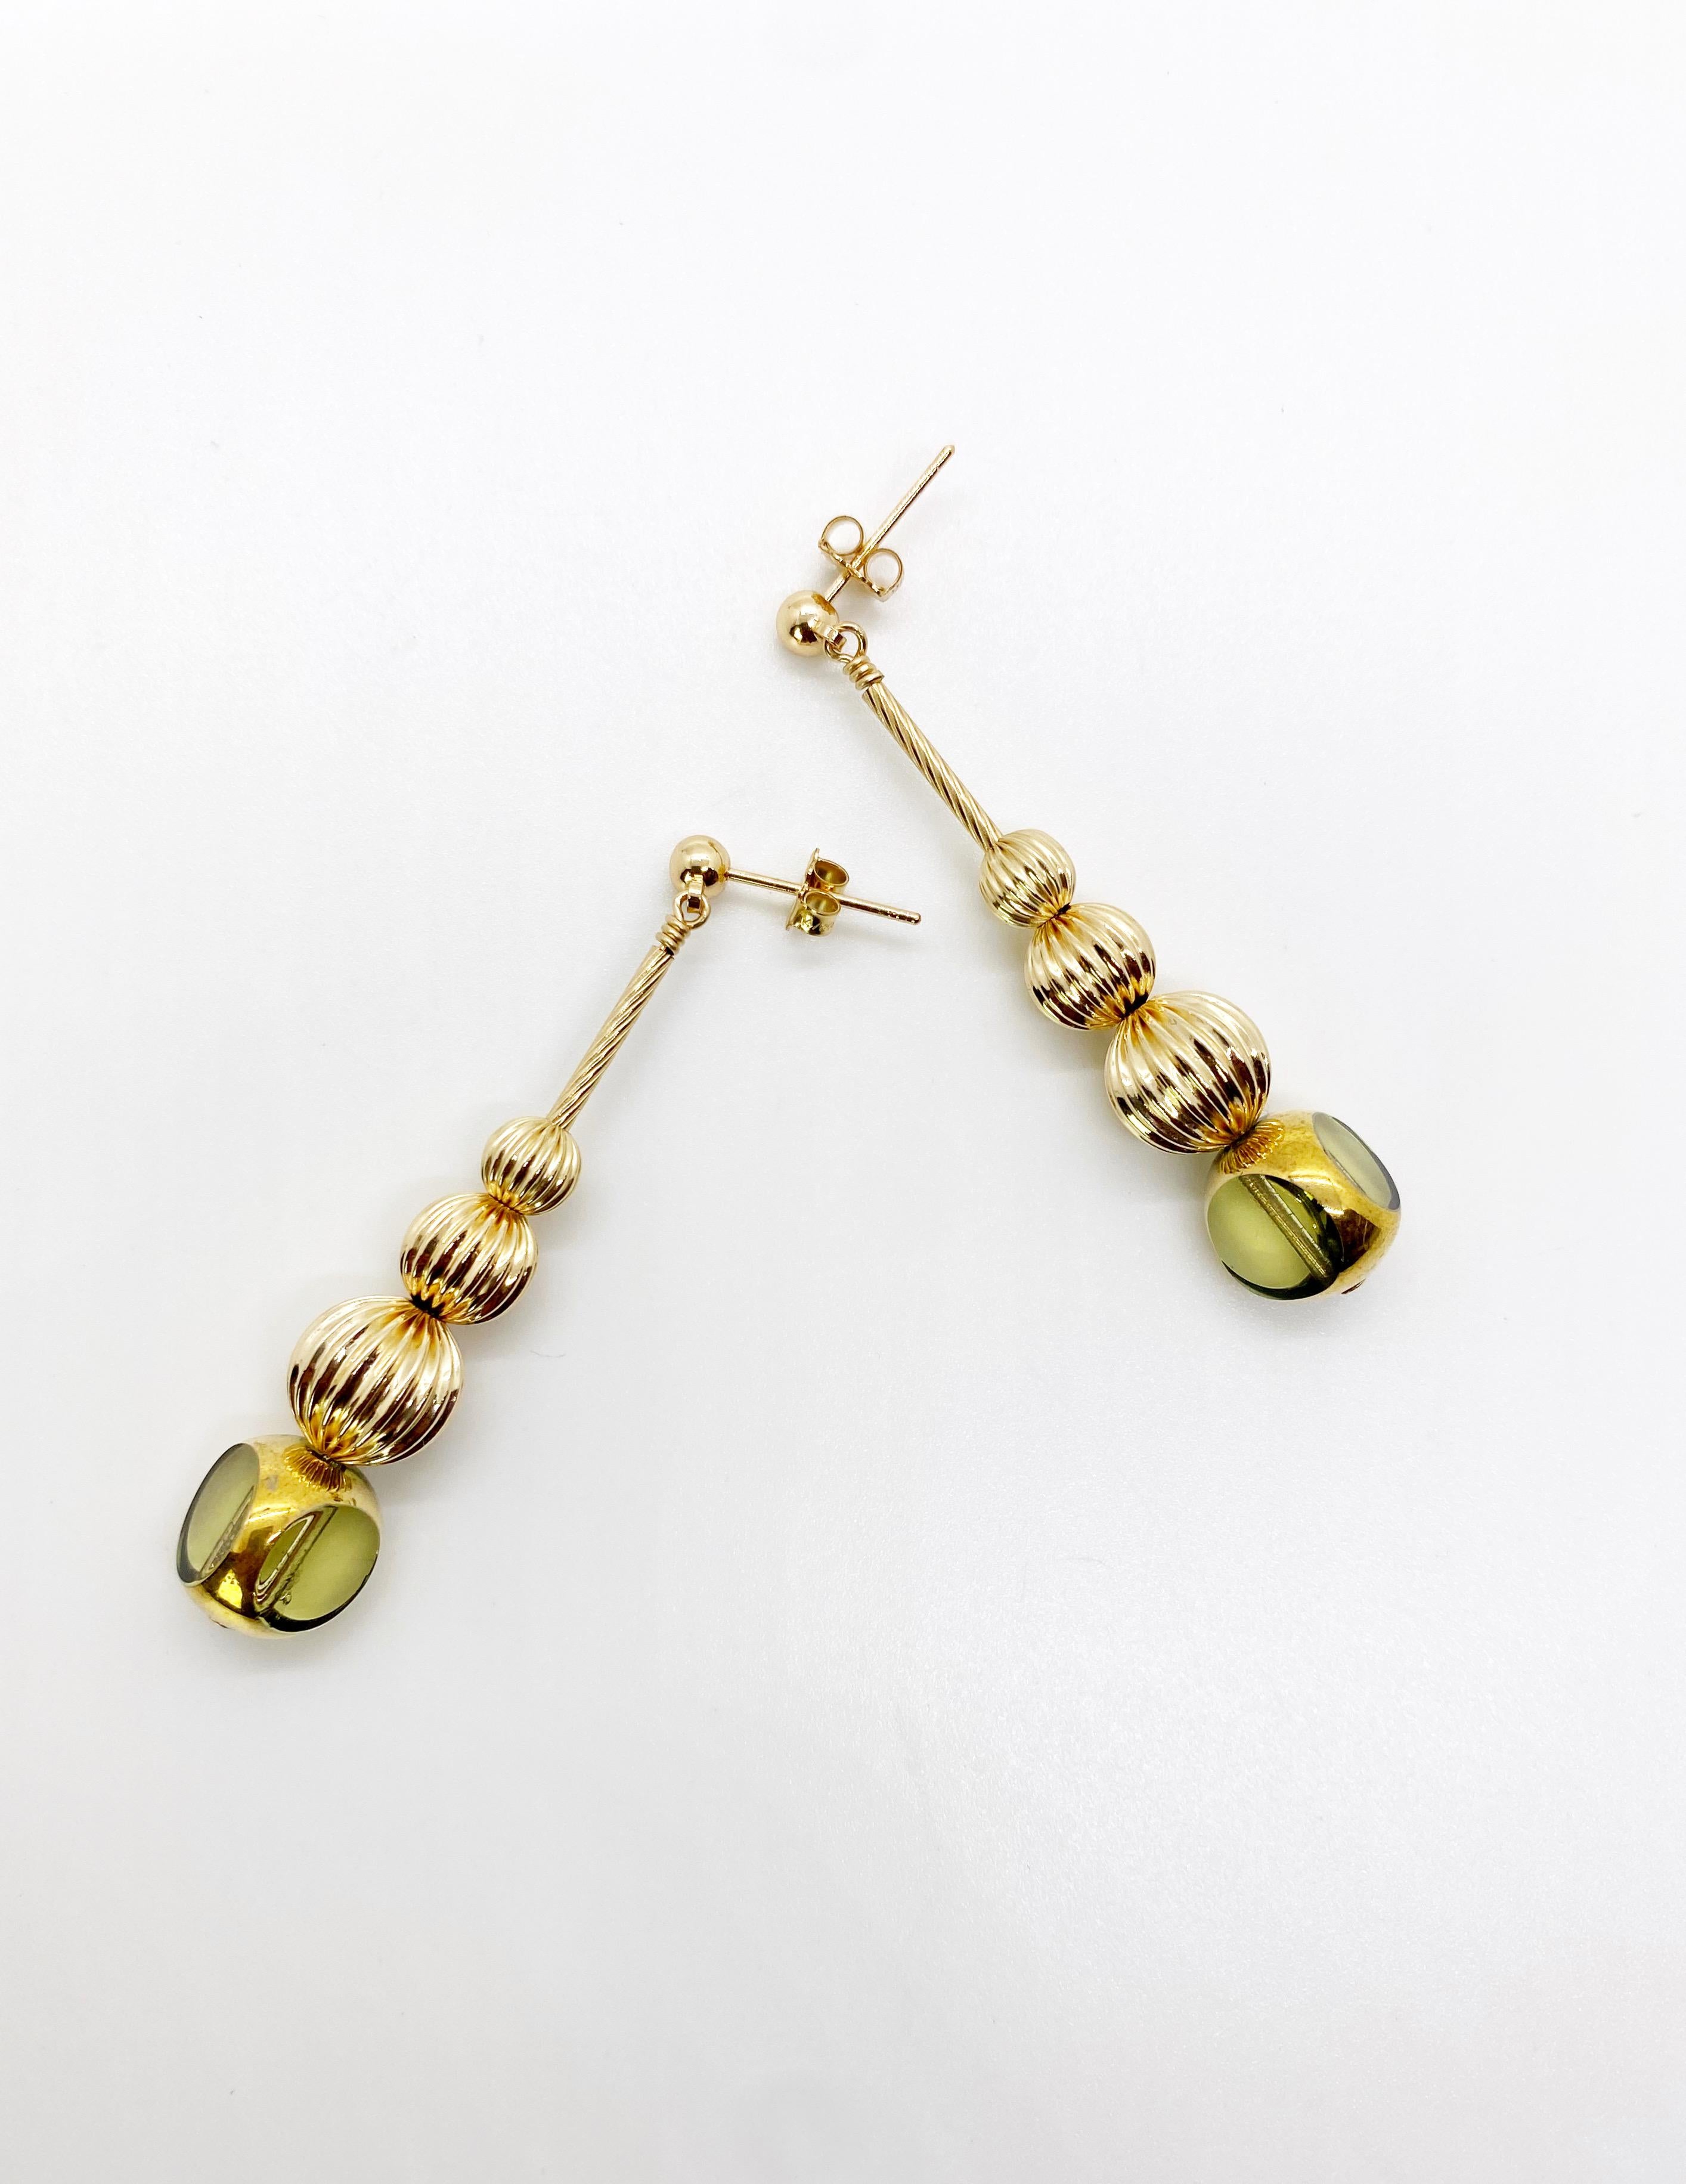 This is for a pair of earrings. This is a listing of a pair of earrings. Each earring consist of 1 semi-round translucent lemon chiffon colored German vintage glass beads that are first plated with platinum and then plated with 24K gold. They are